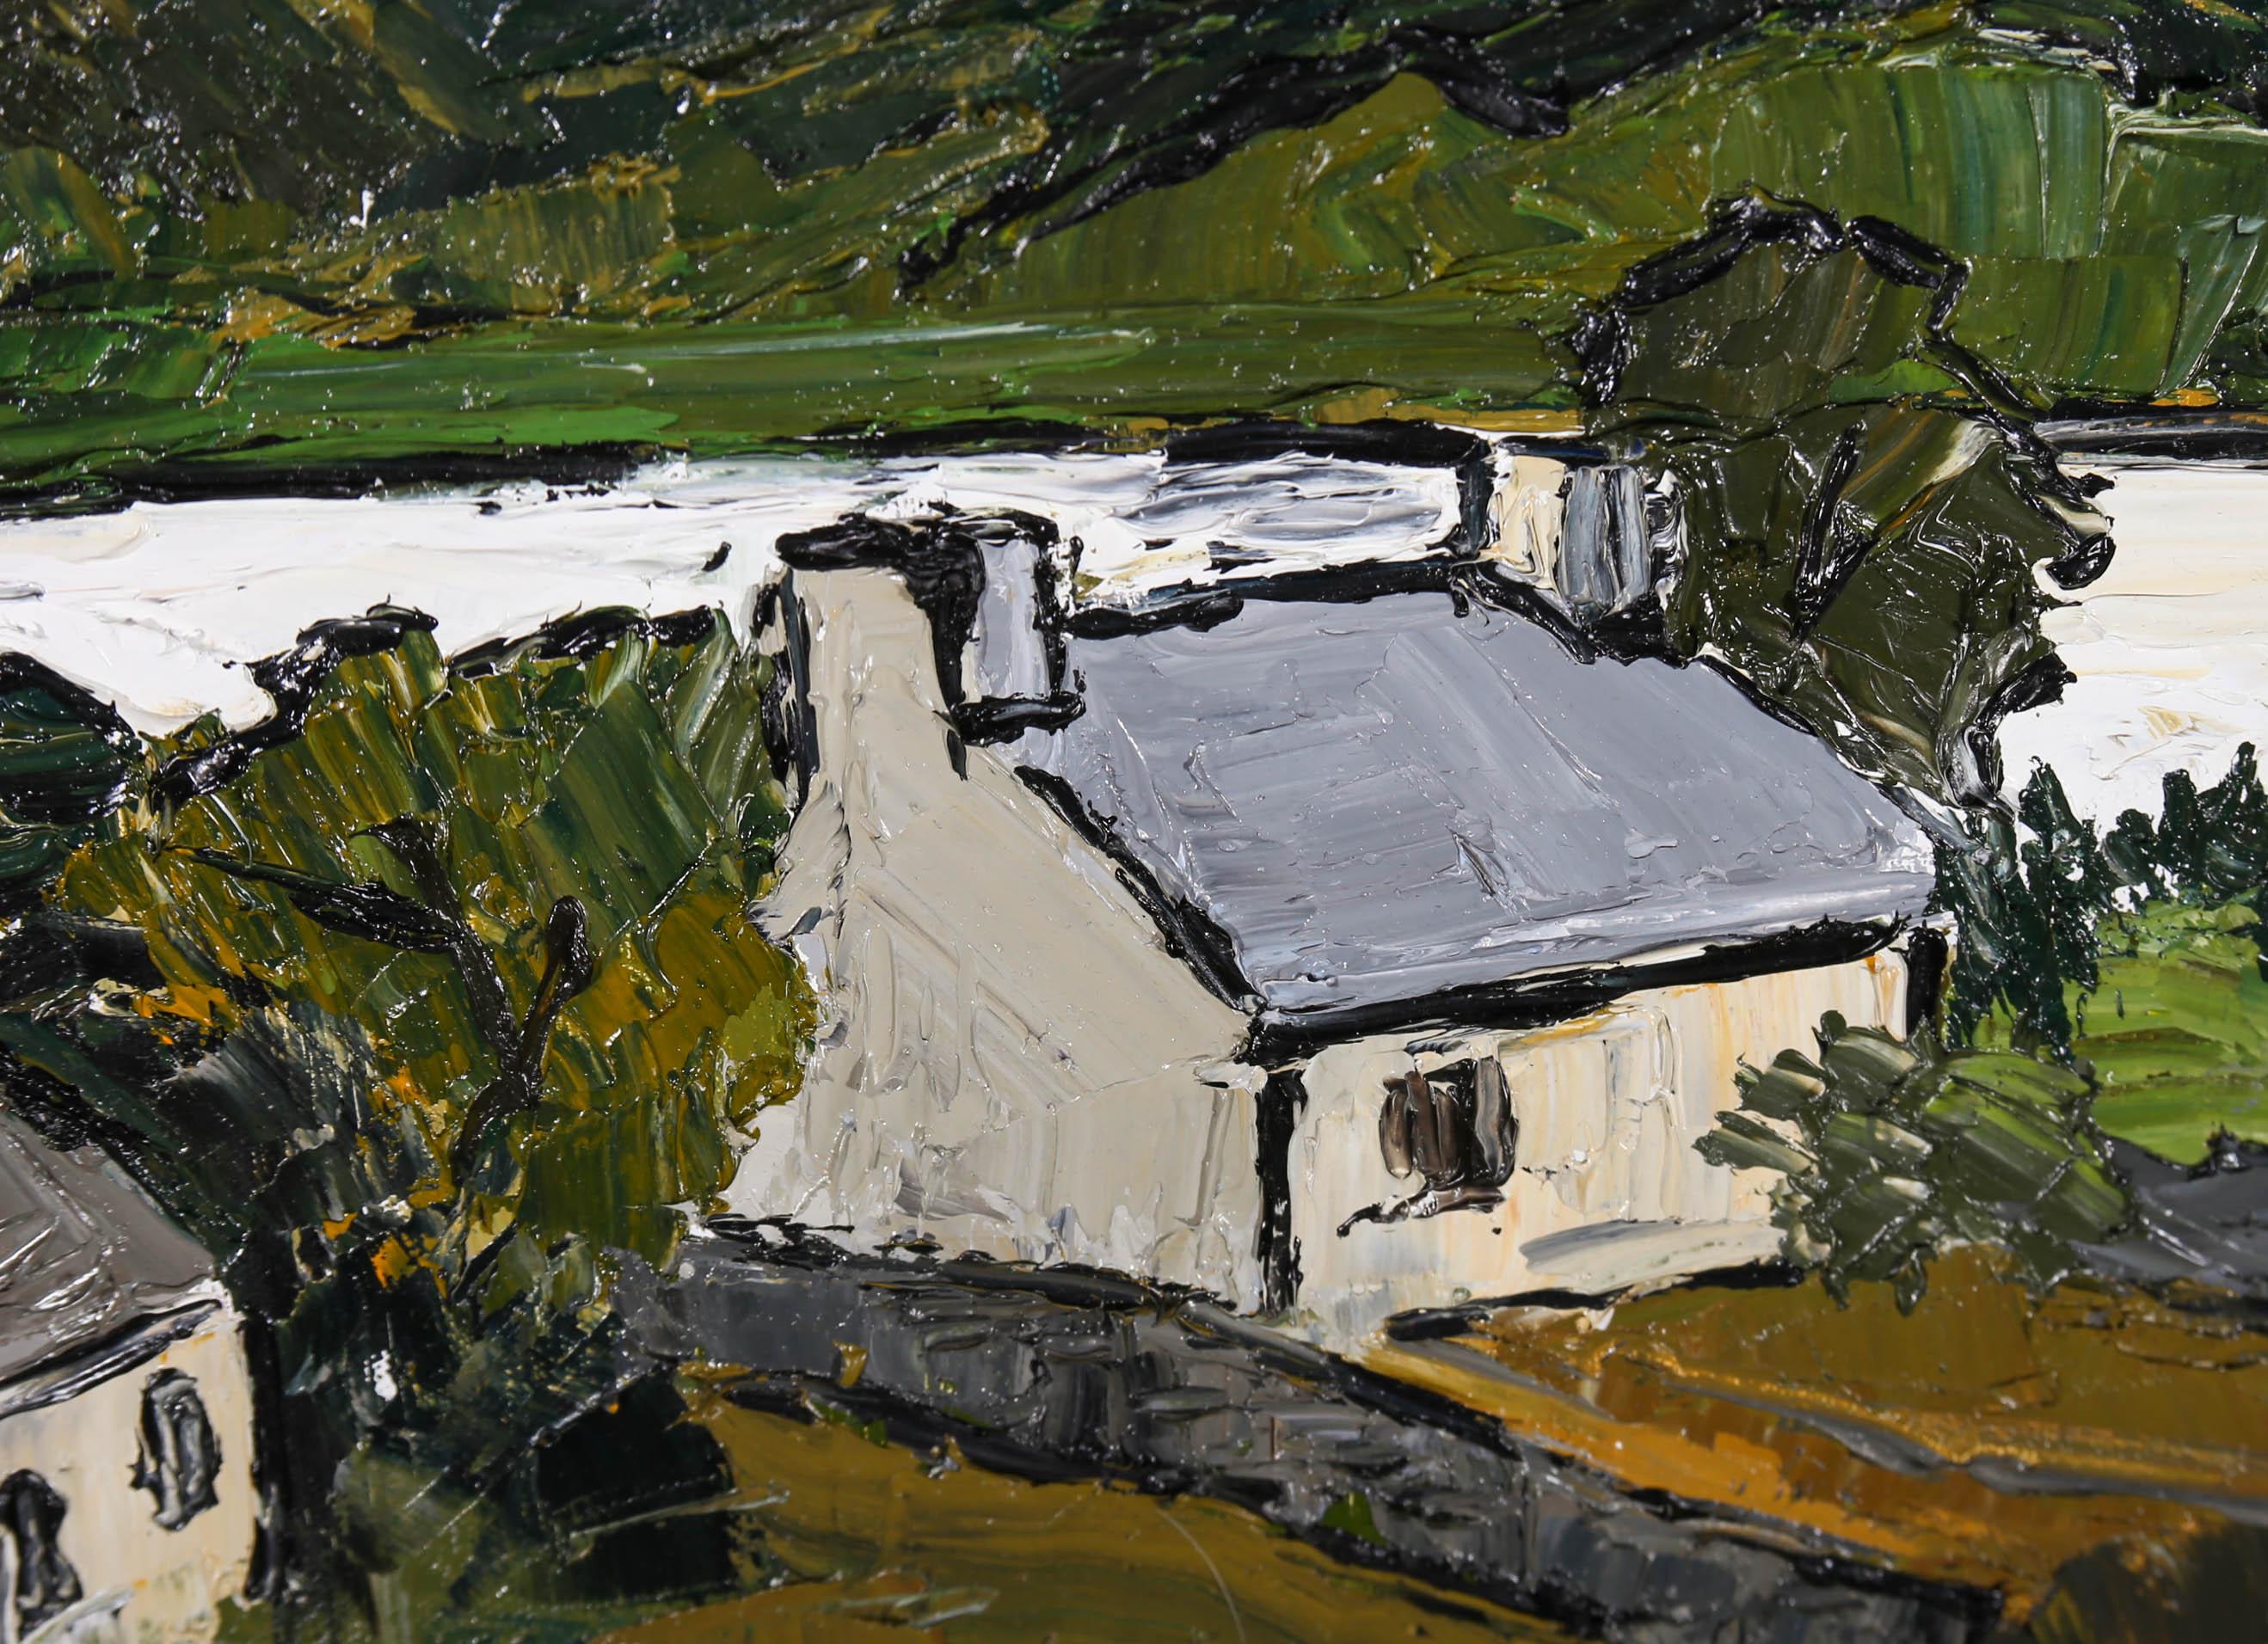 Daniel Nichols After Kyffin Williams - Contemporary Oil, Little Stone Cottages 4